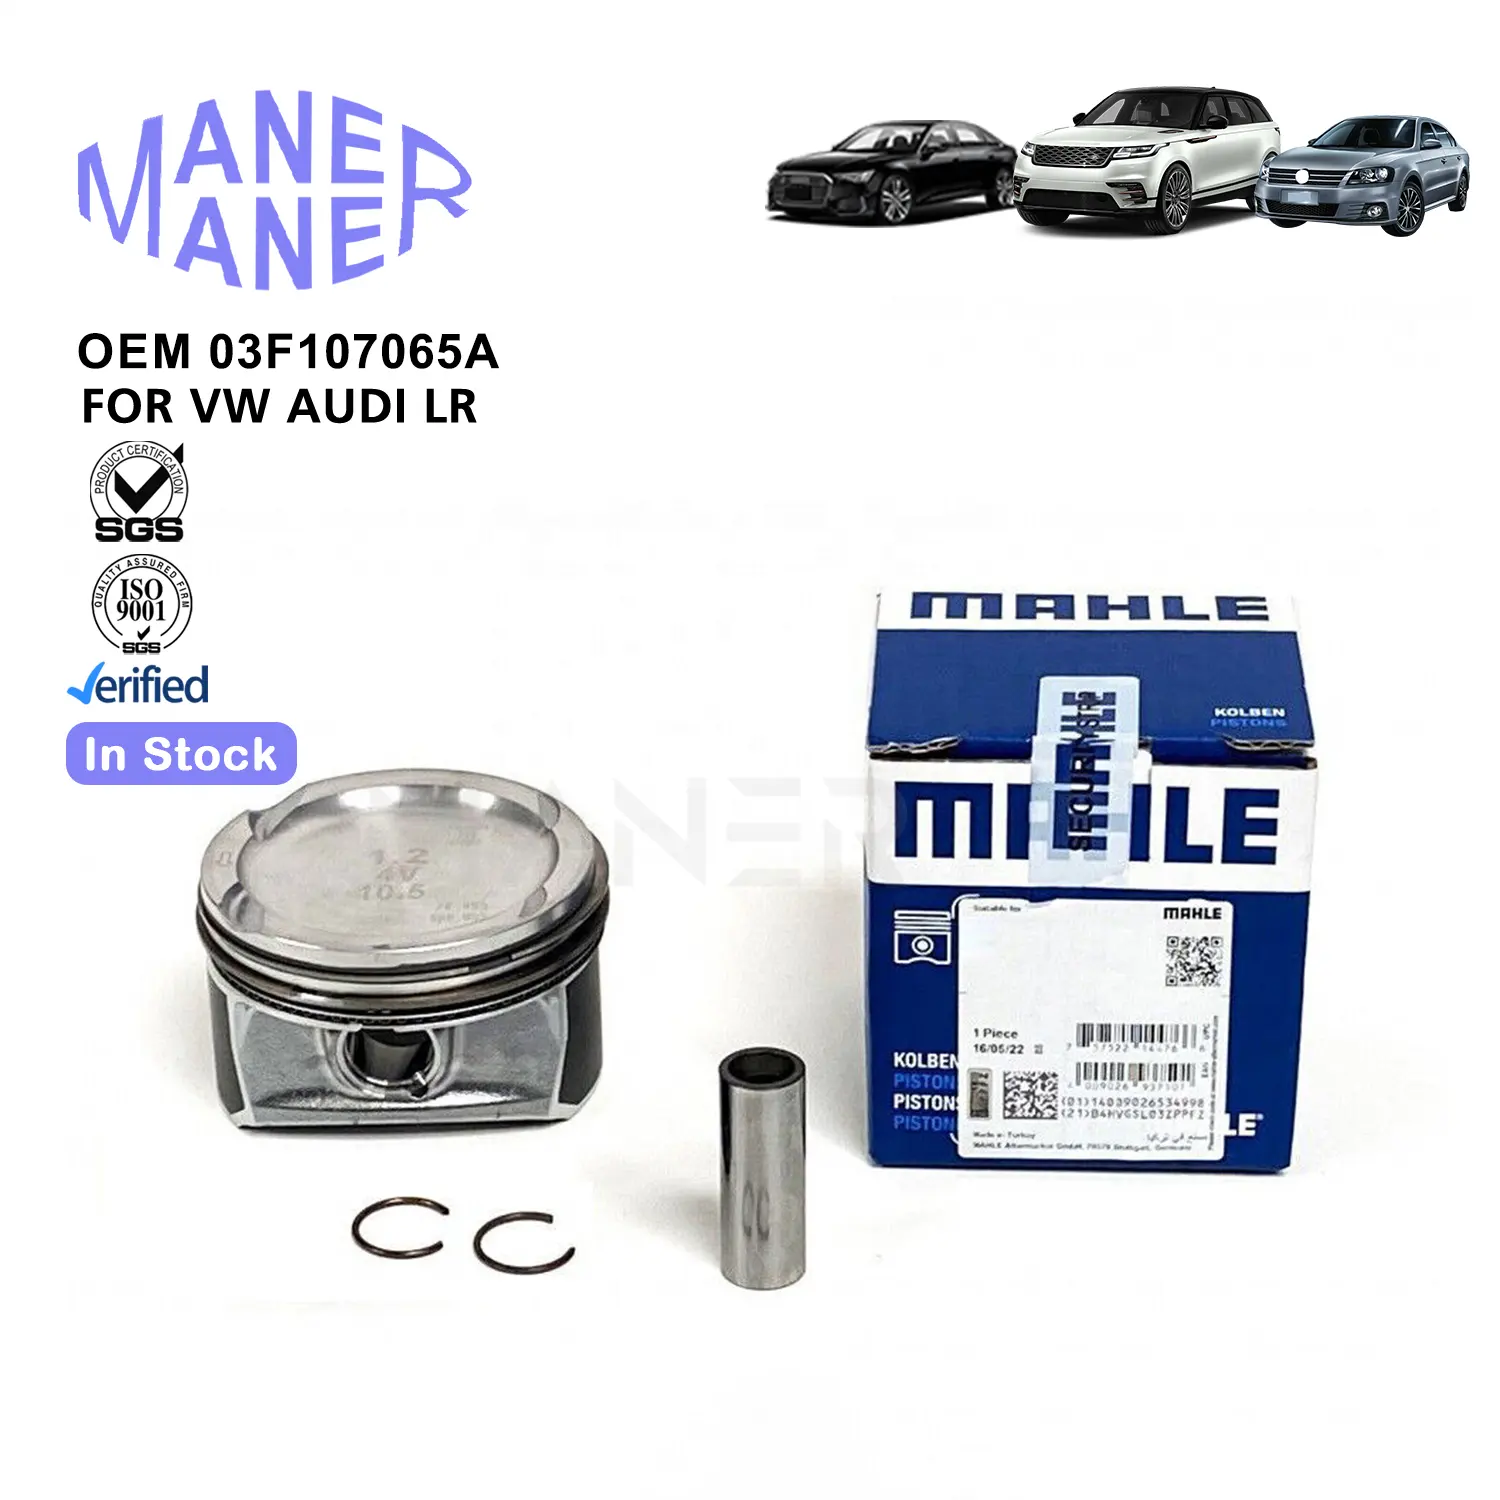 MANER Auto Engine Systems 03F107065D 03F107065F 03F107065A 03F107065G manufacture well made Engine Piston For Audi VW Golf Seat